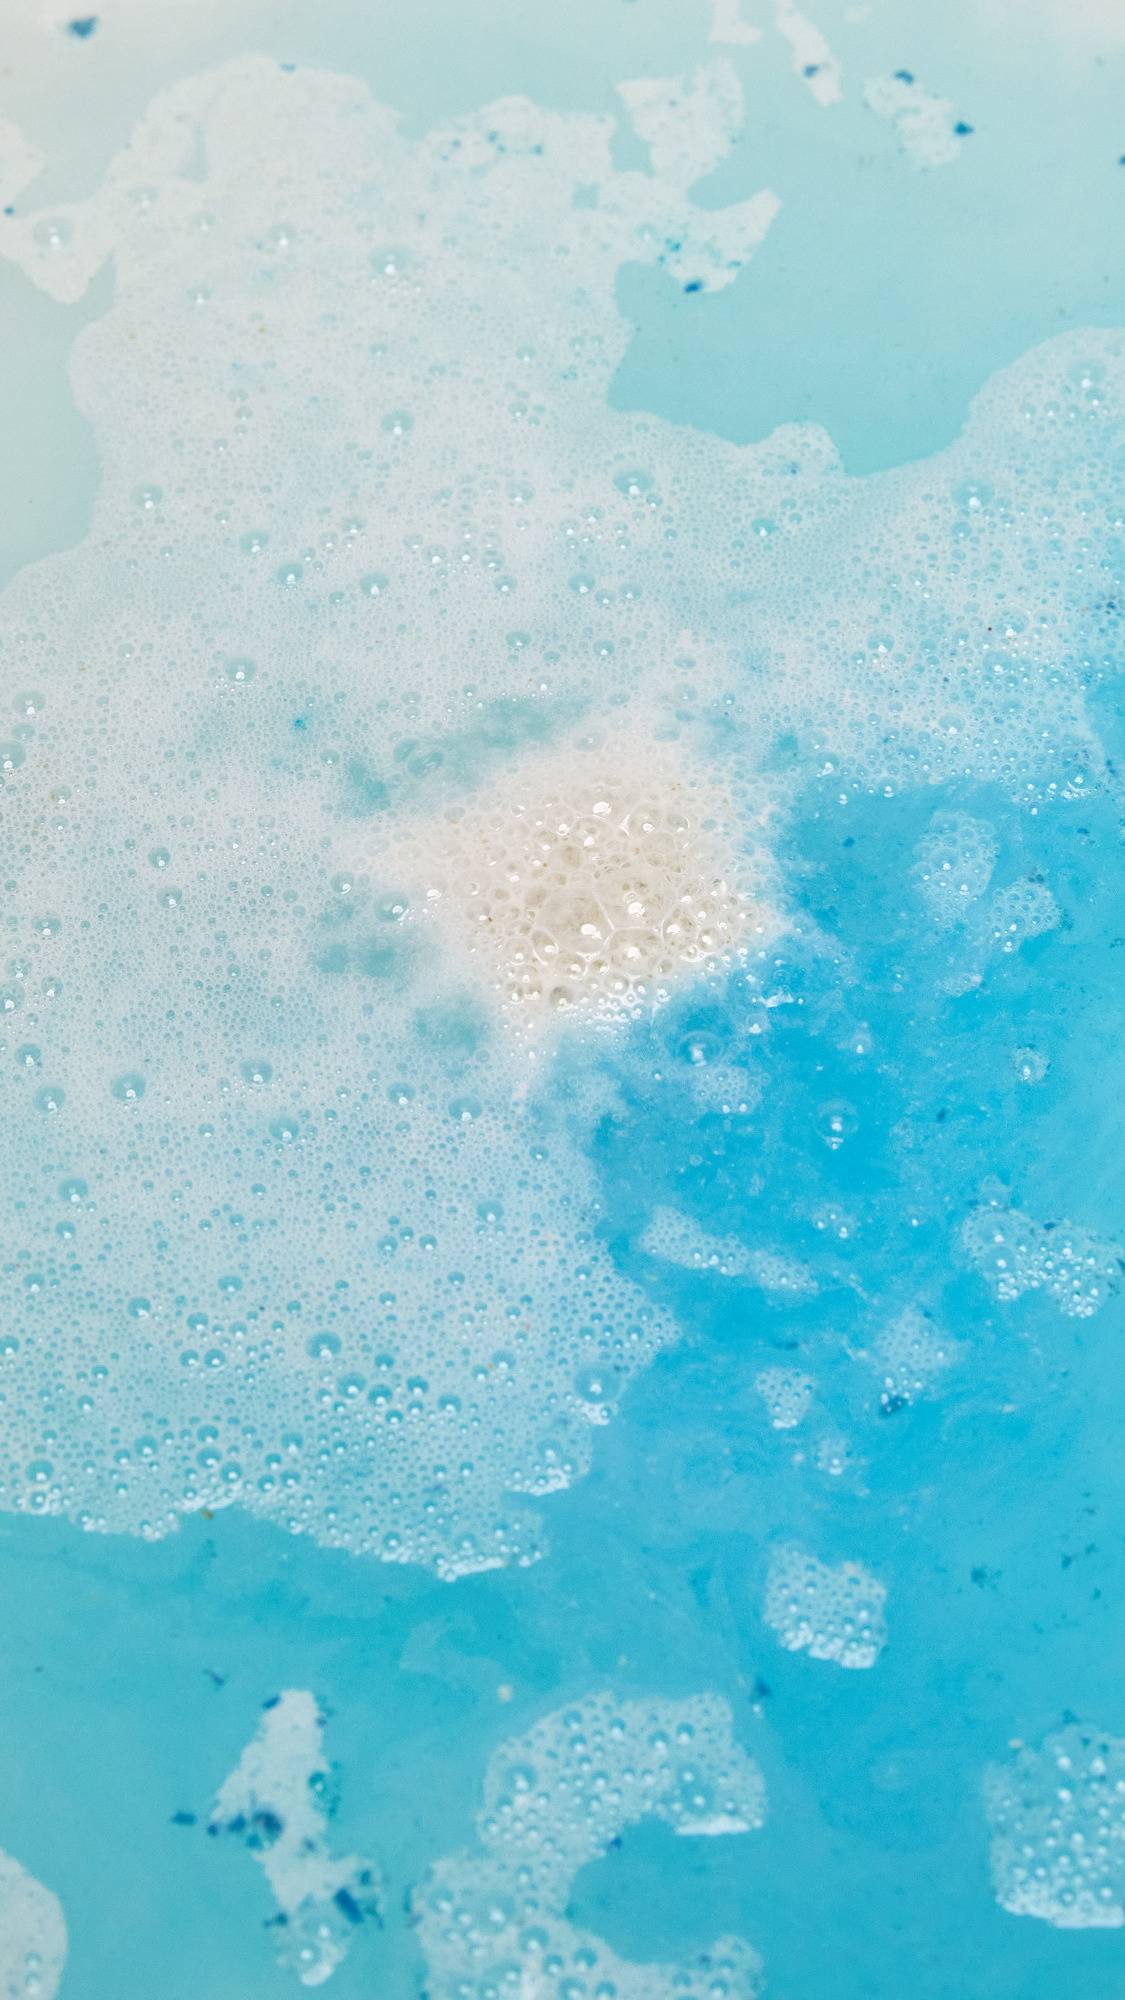 The Dream Cream Epsom salt bath bomb has dissolved leaving clear, turquoise water with a delicate dusting of foam on the surface. 